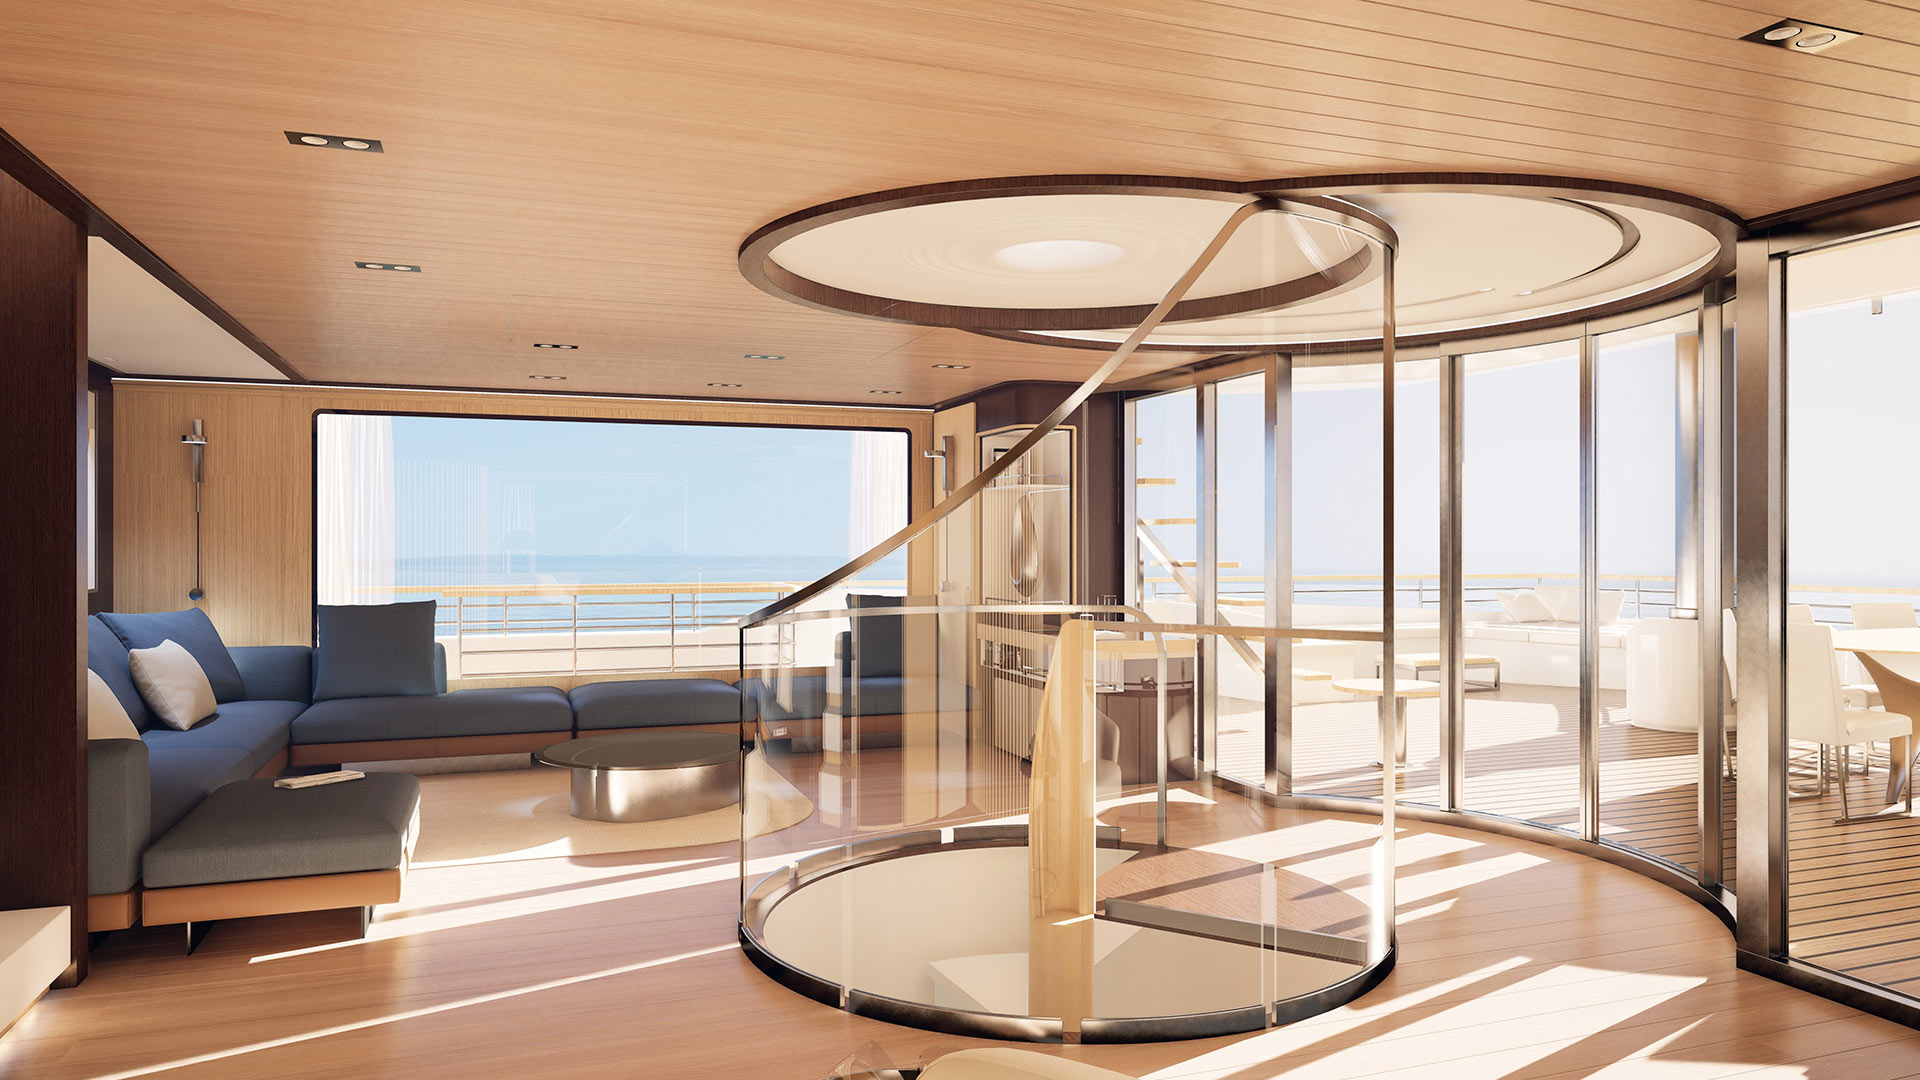 Interior of the upper deck of a luxury yacht with stairs in the middle